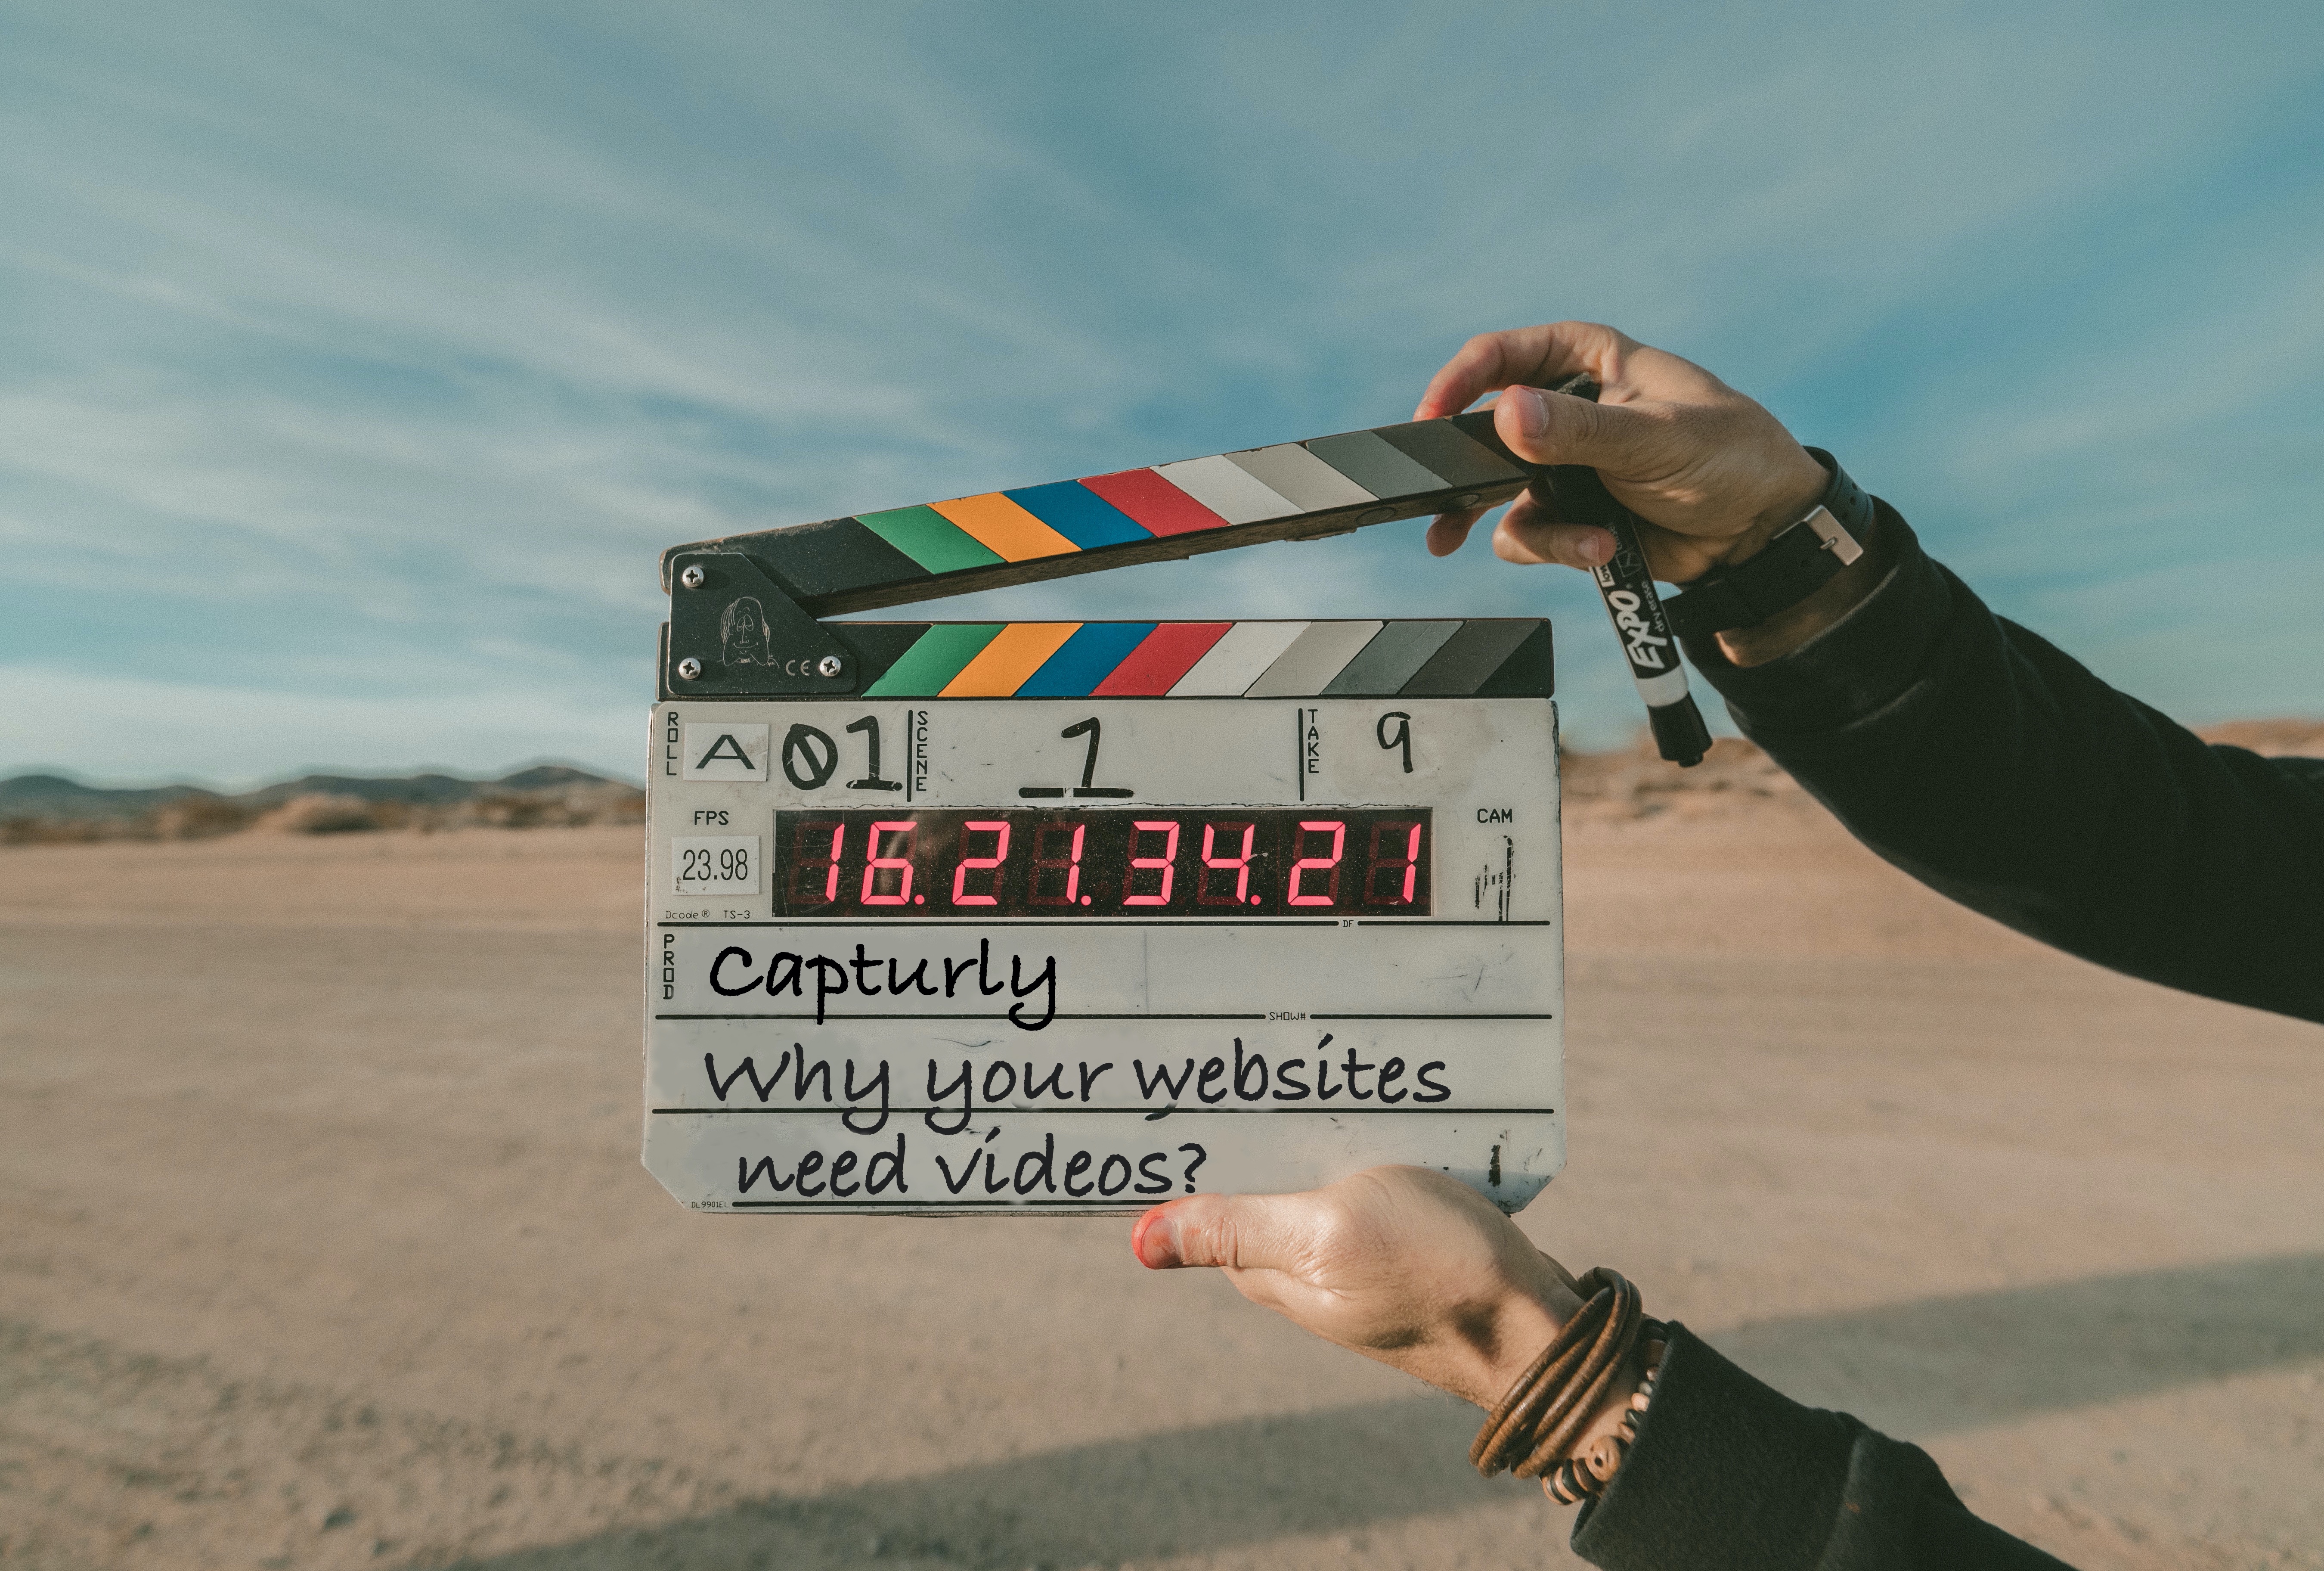 why your websites need videos